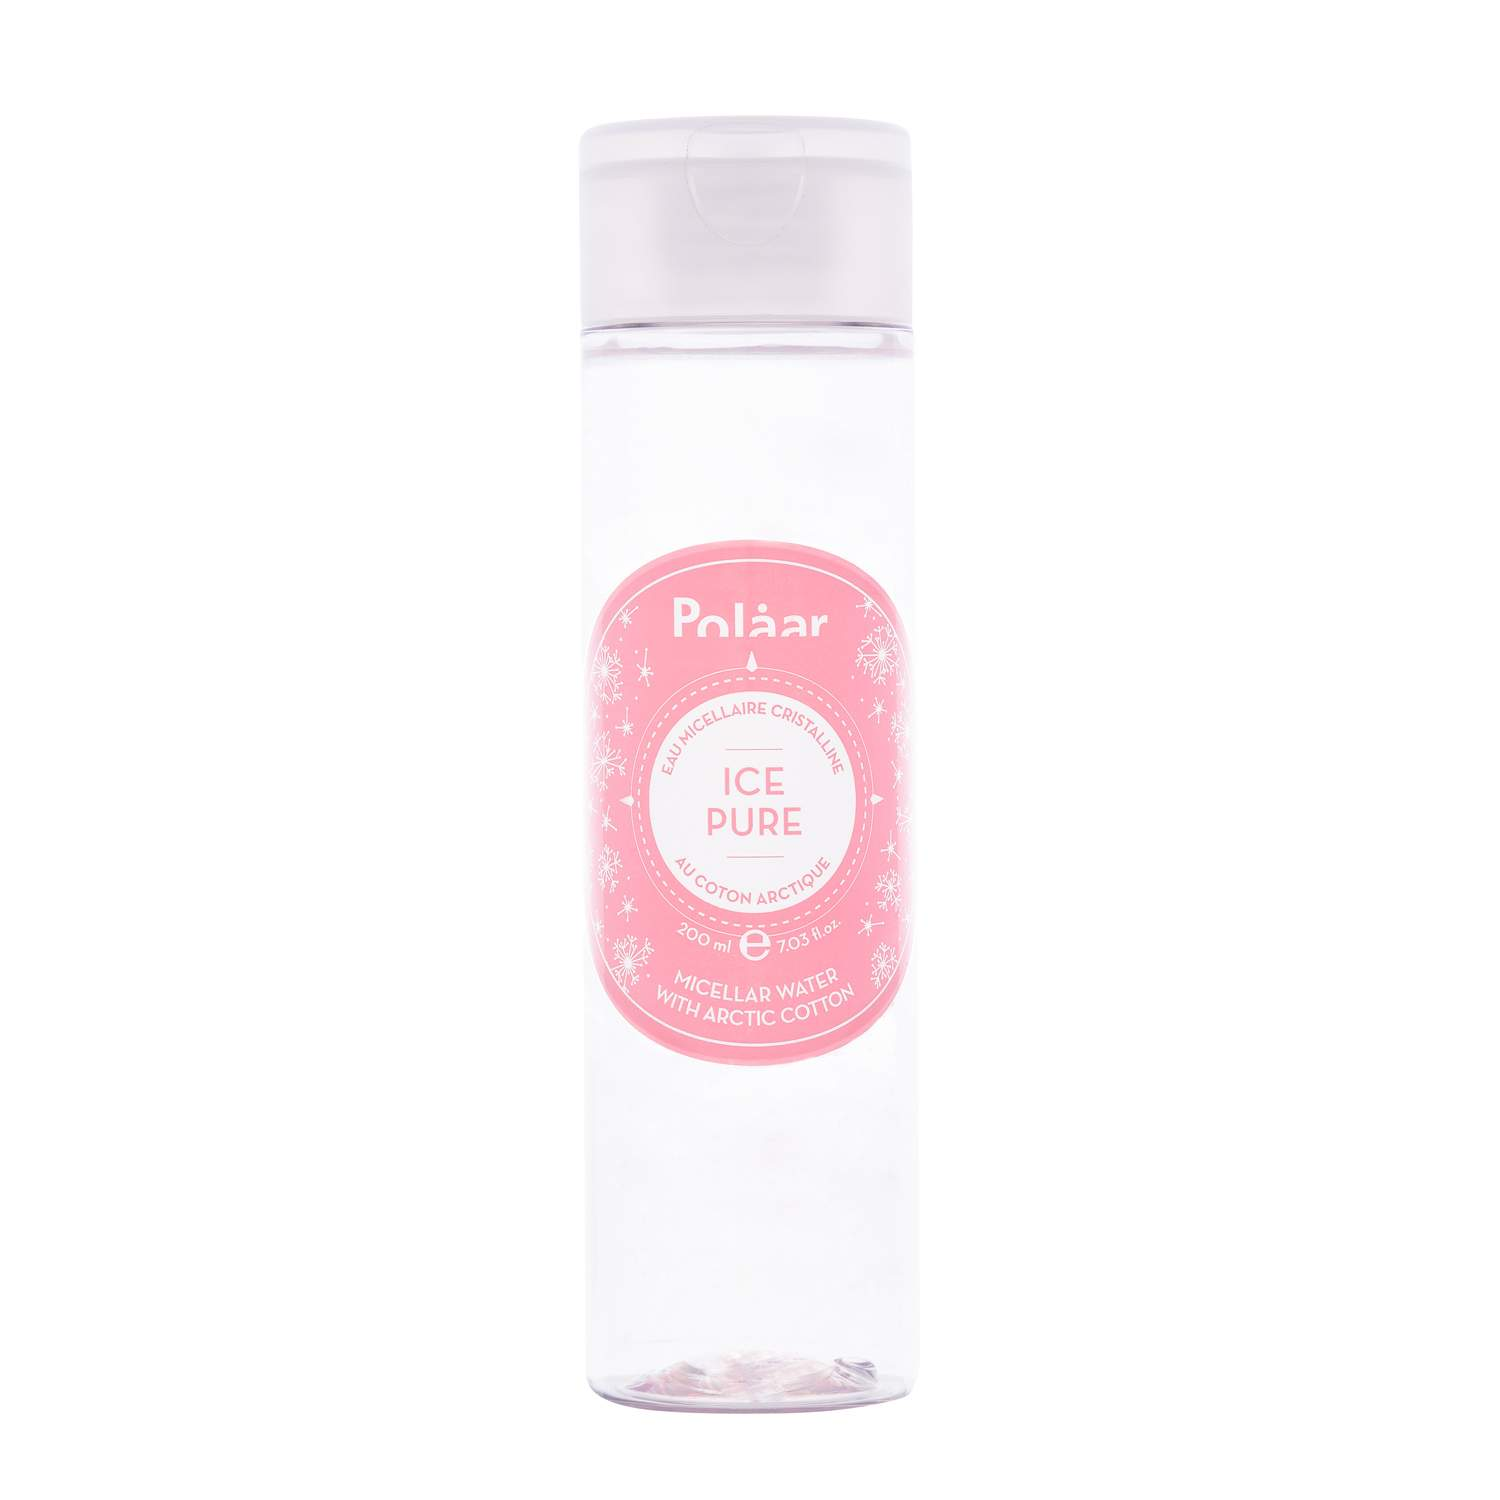 Polaar IcePure Micellar Water with Arctic Cotton  1